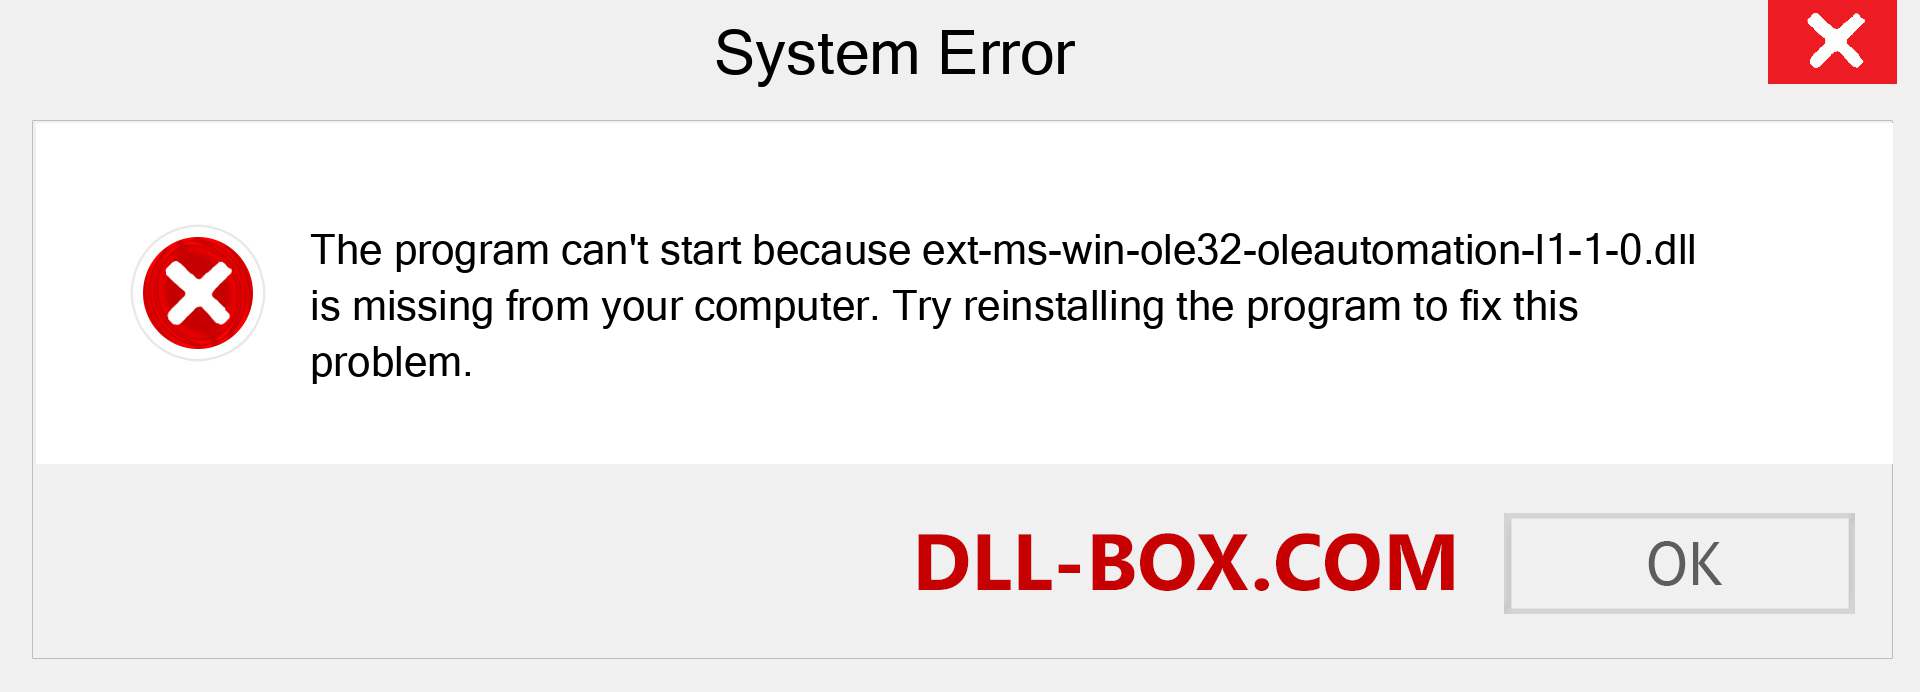  ext-ms-win-ole32-oleautomation-l1-1-0.dll file is missing?. Download for Windows 7, 8, 10 - Fix  ext-ms-win-ole32-oleautomation-l1-1-0 dll Missing Error on Windows, photos, images